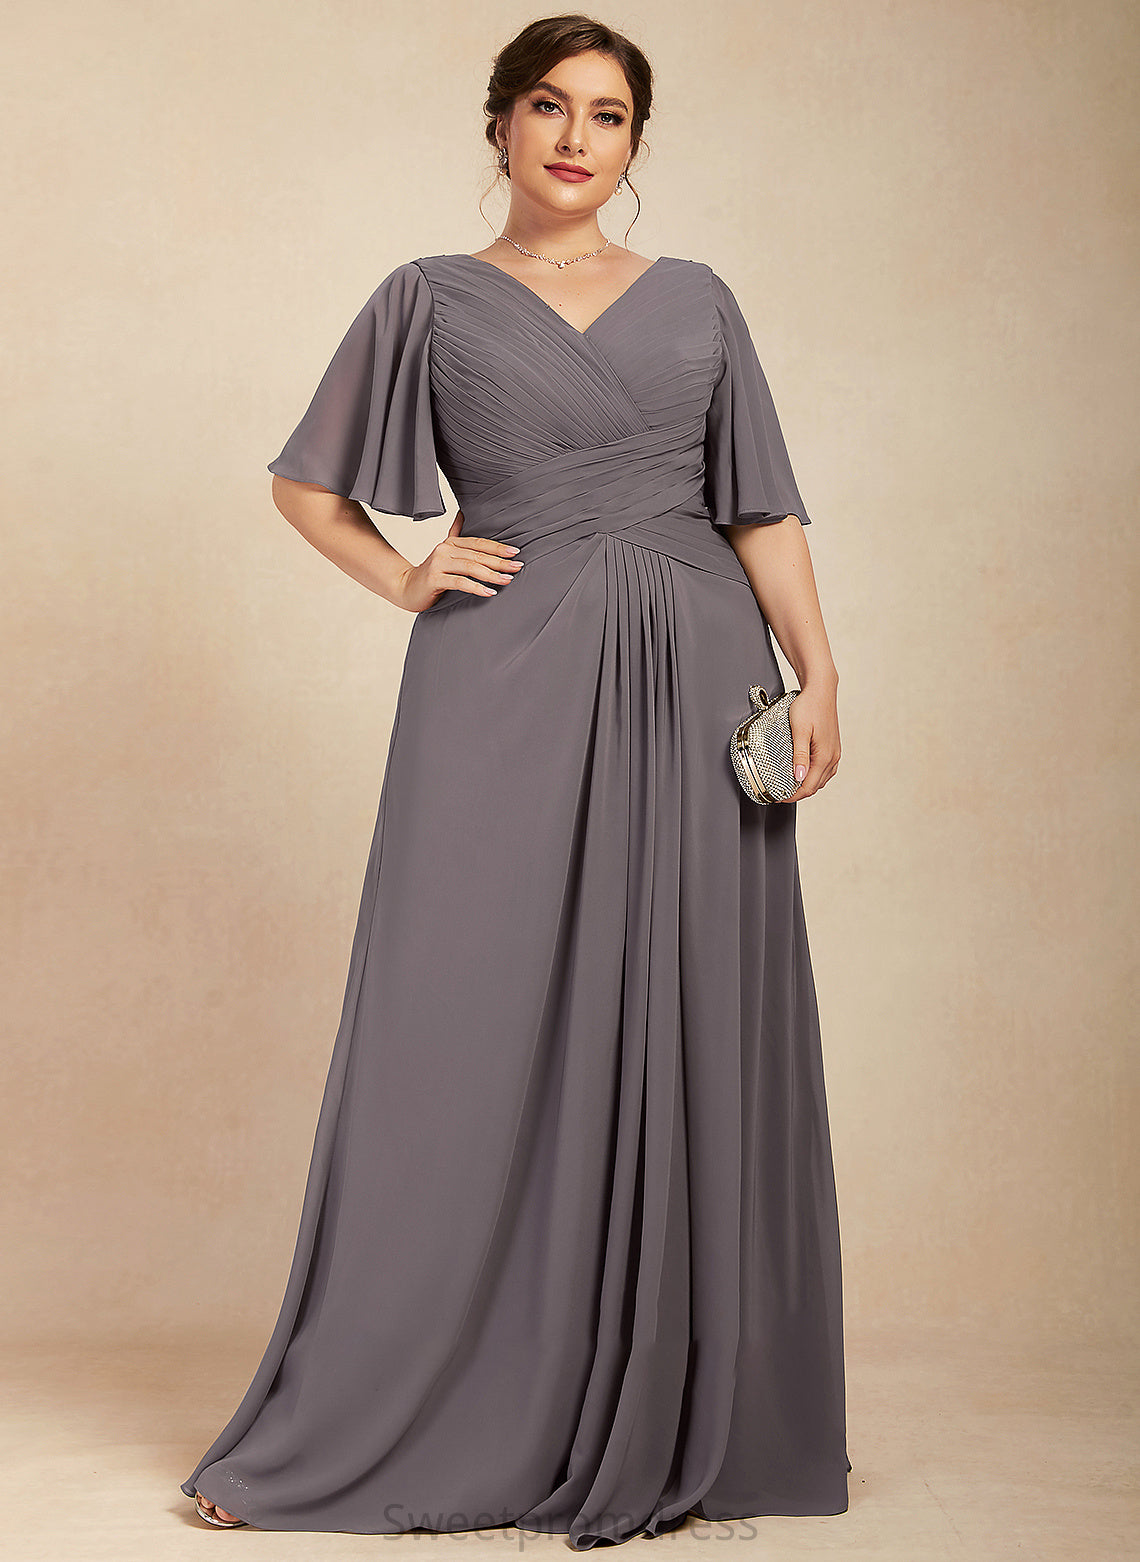 Alani Mother of the Bride Dresses Chiffon Floor-Length the Dress With Bride A-Line Mother Ruffle V-neck of